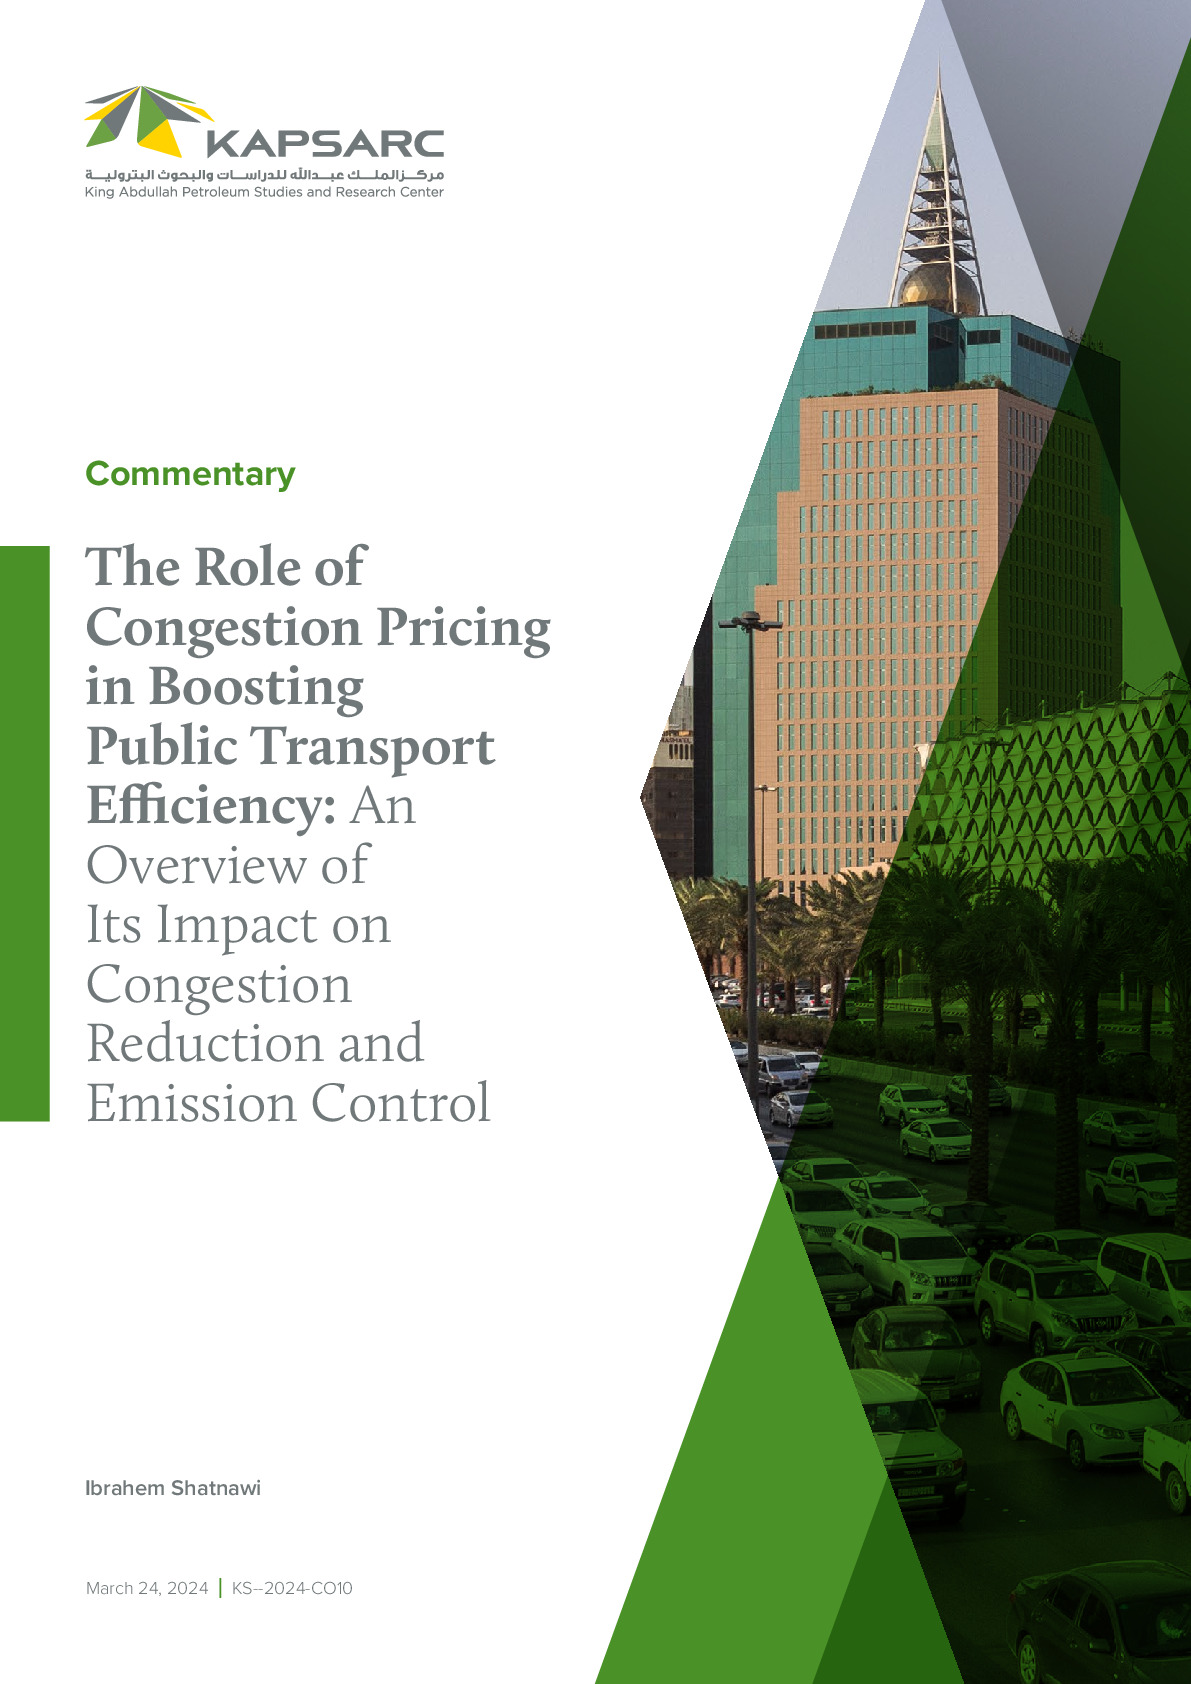 The Role of Congestion Pricing in Boosting Public Transport Efficiency: An Overview of Its Impact on Congestion Reduction and Emission Control